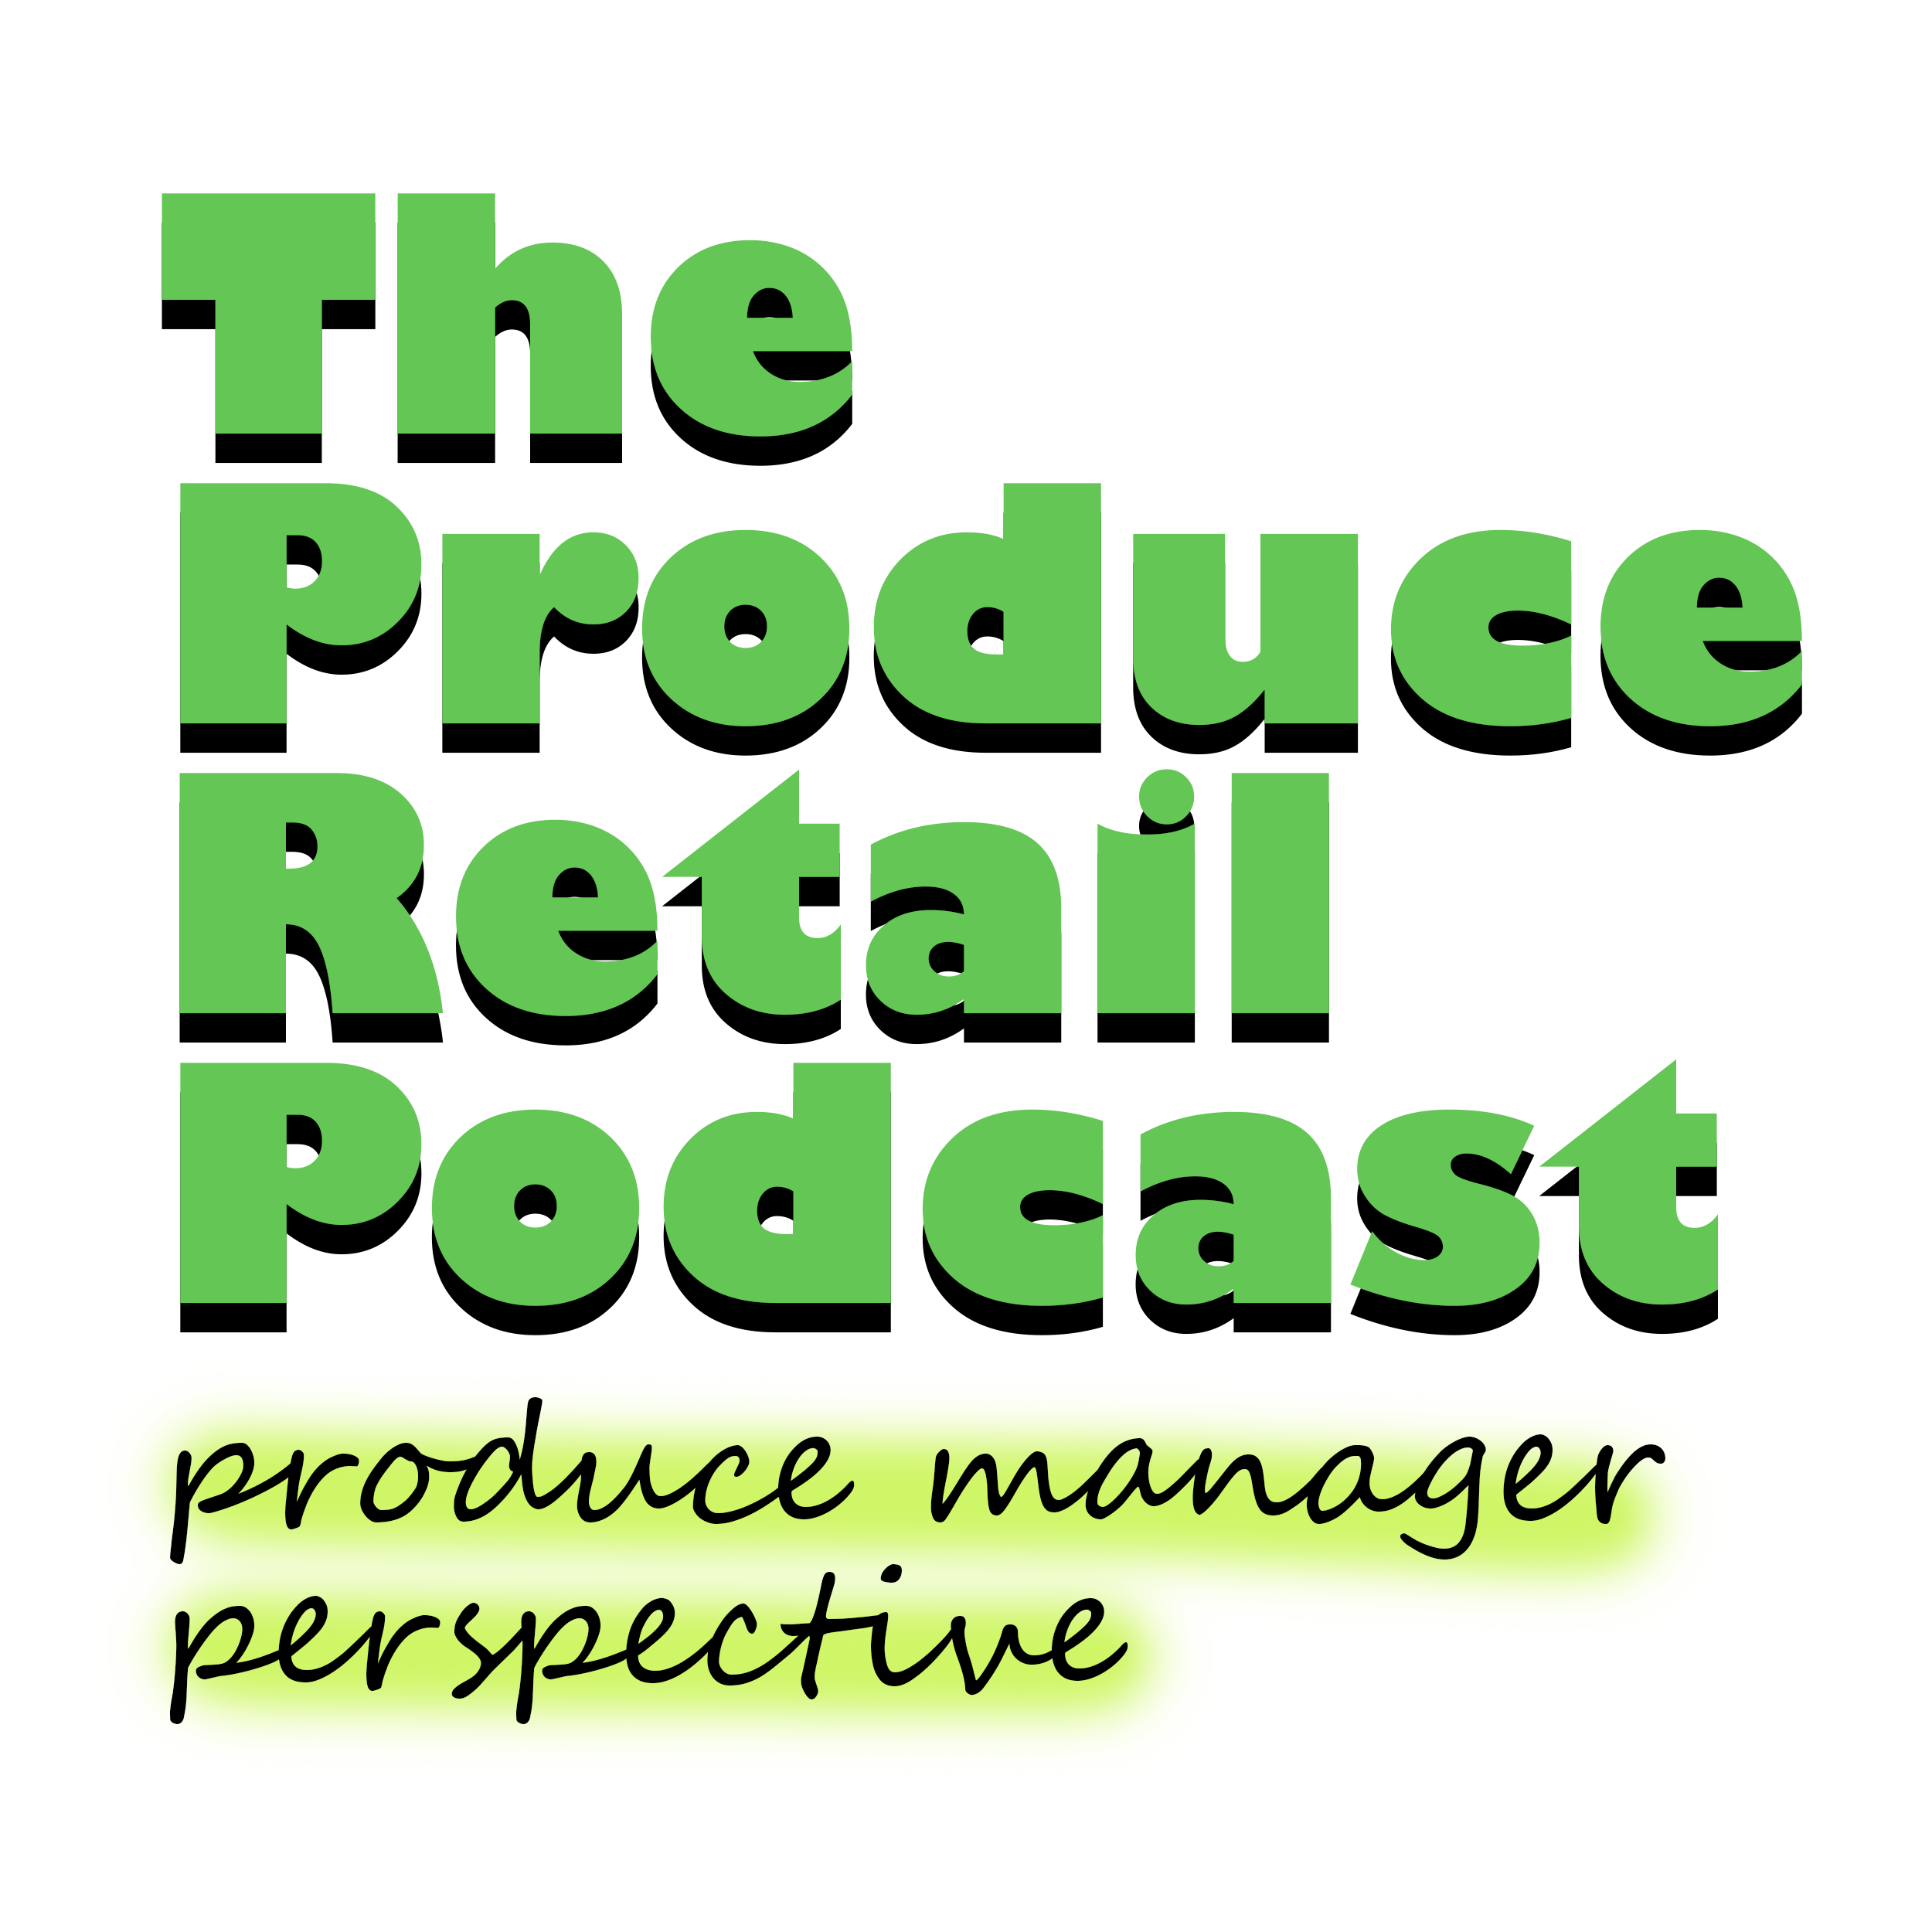 A shout-out to produce managers plus the origin story of Love Your Produce Manager Day